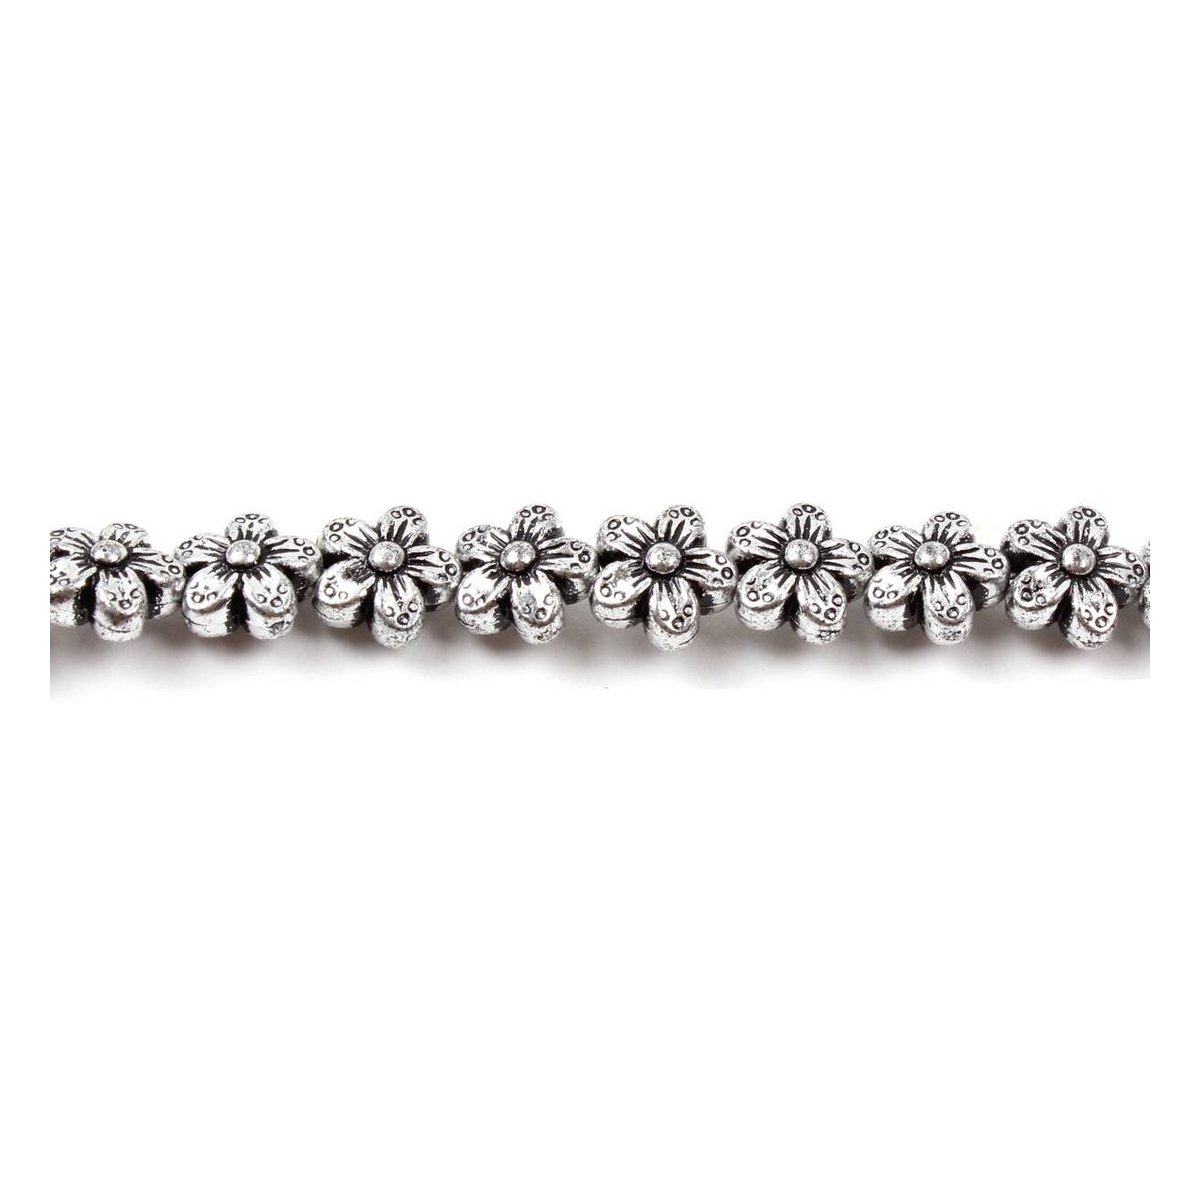 Antique Silver Effect Flat Flower Bead String 16 Pieces